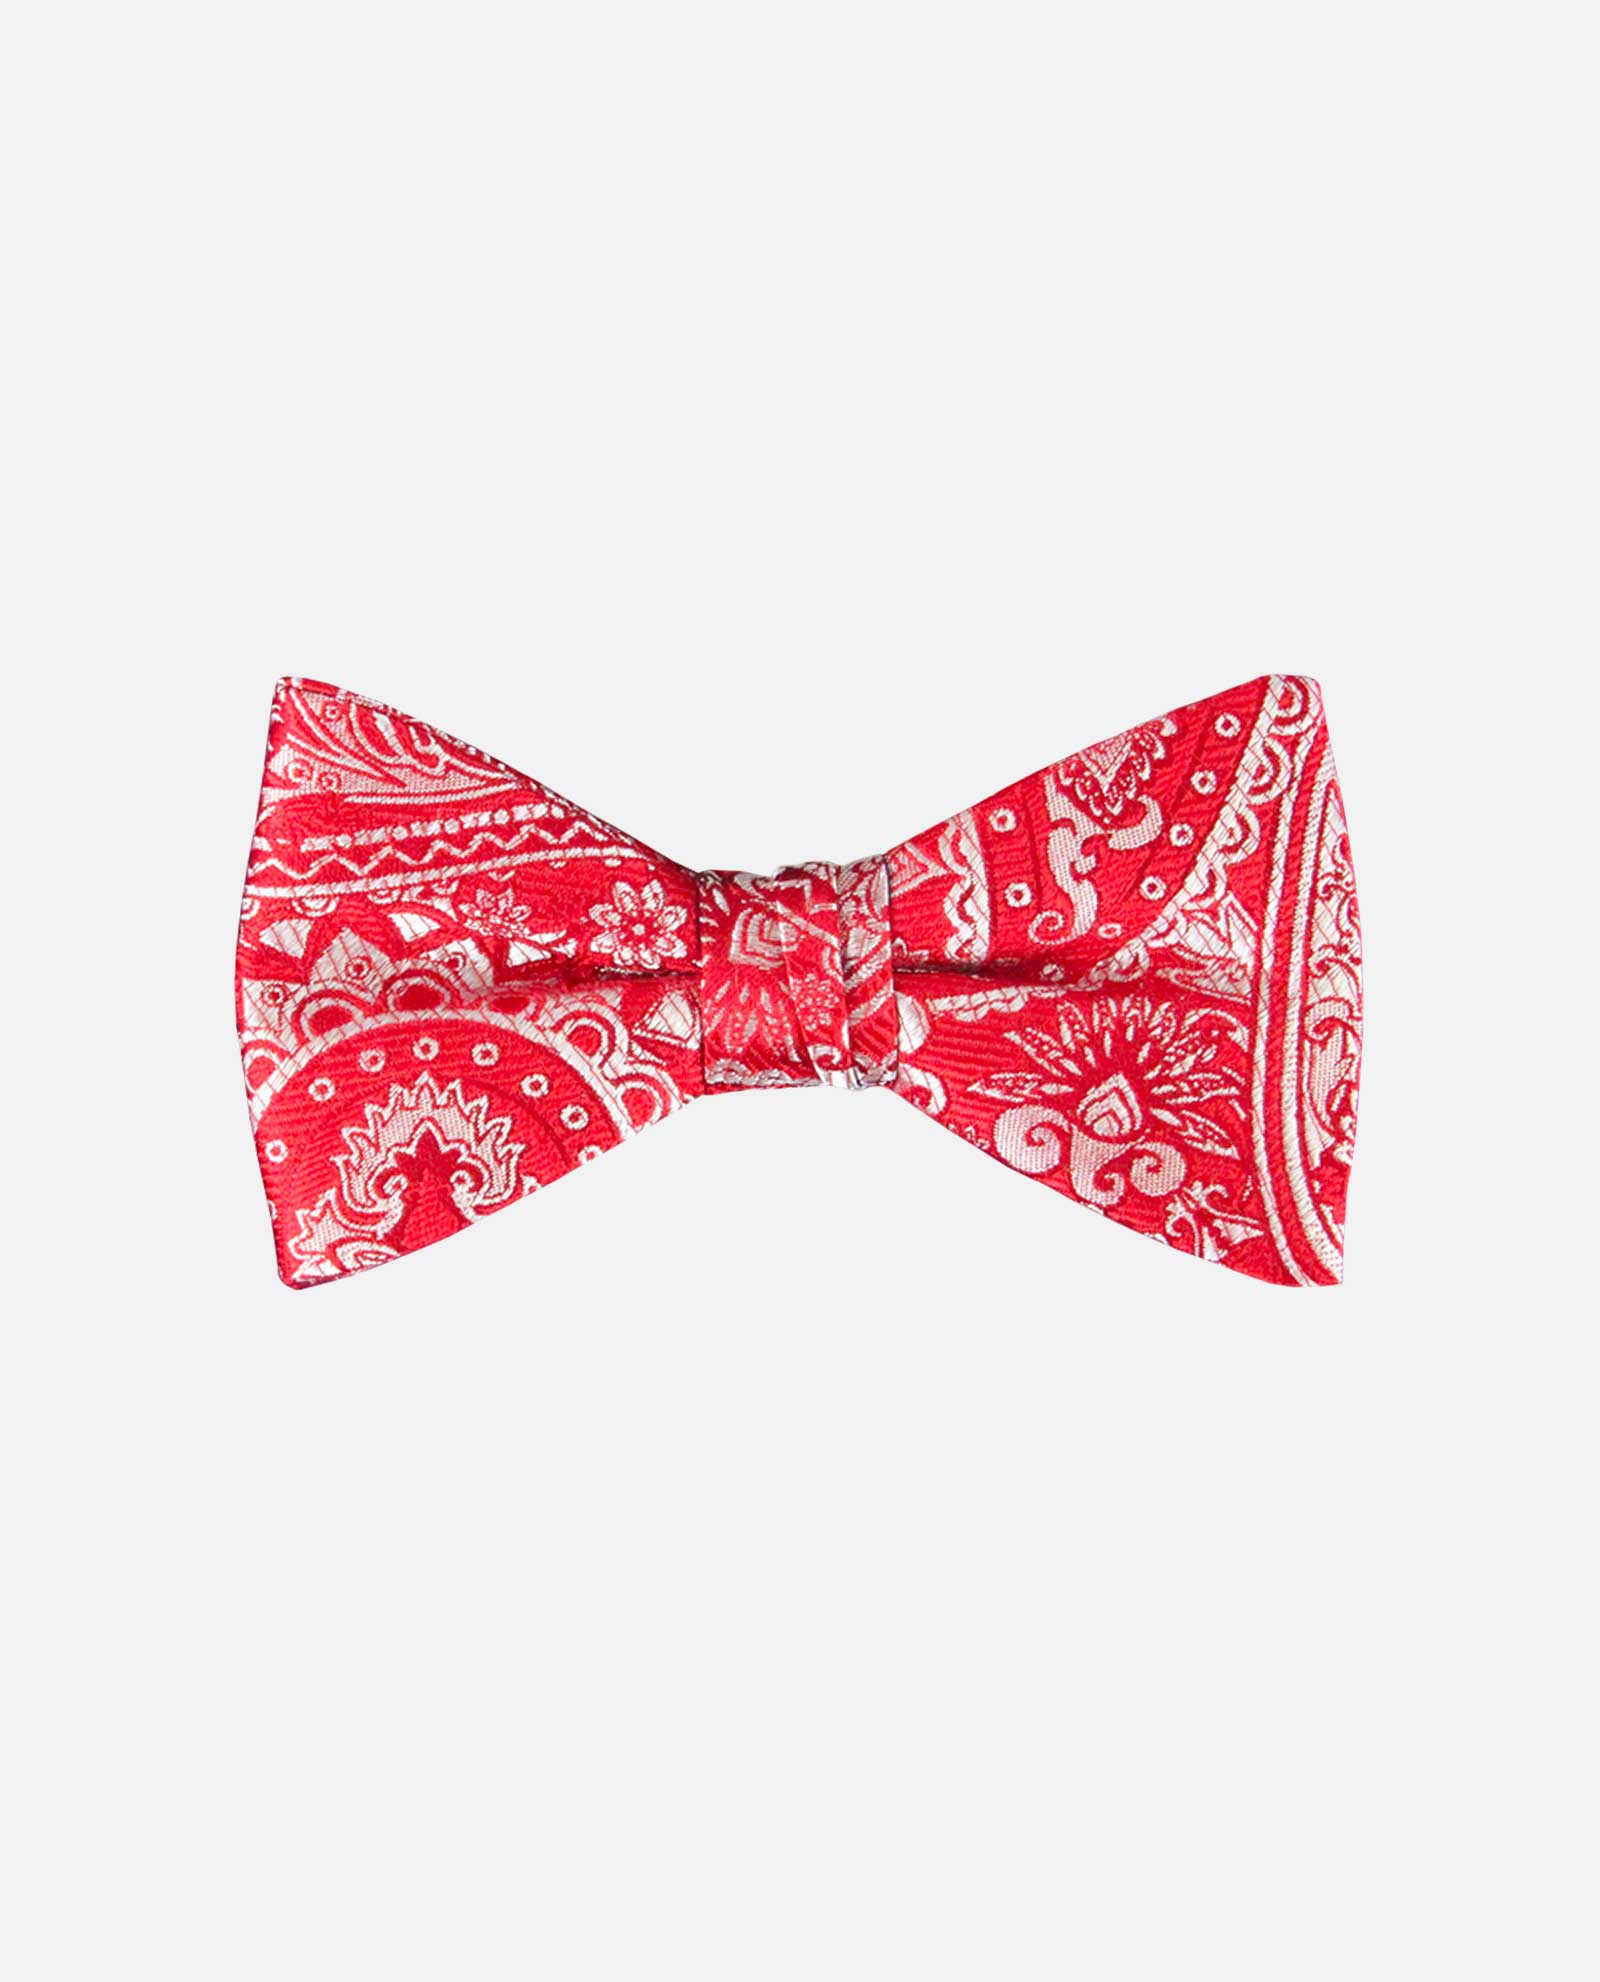 Red with White Paisley Bow Tie